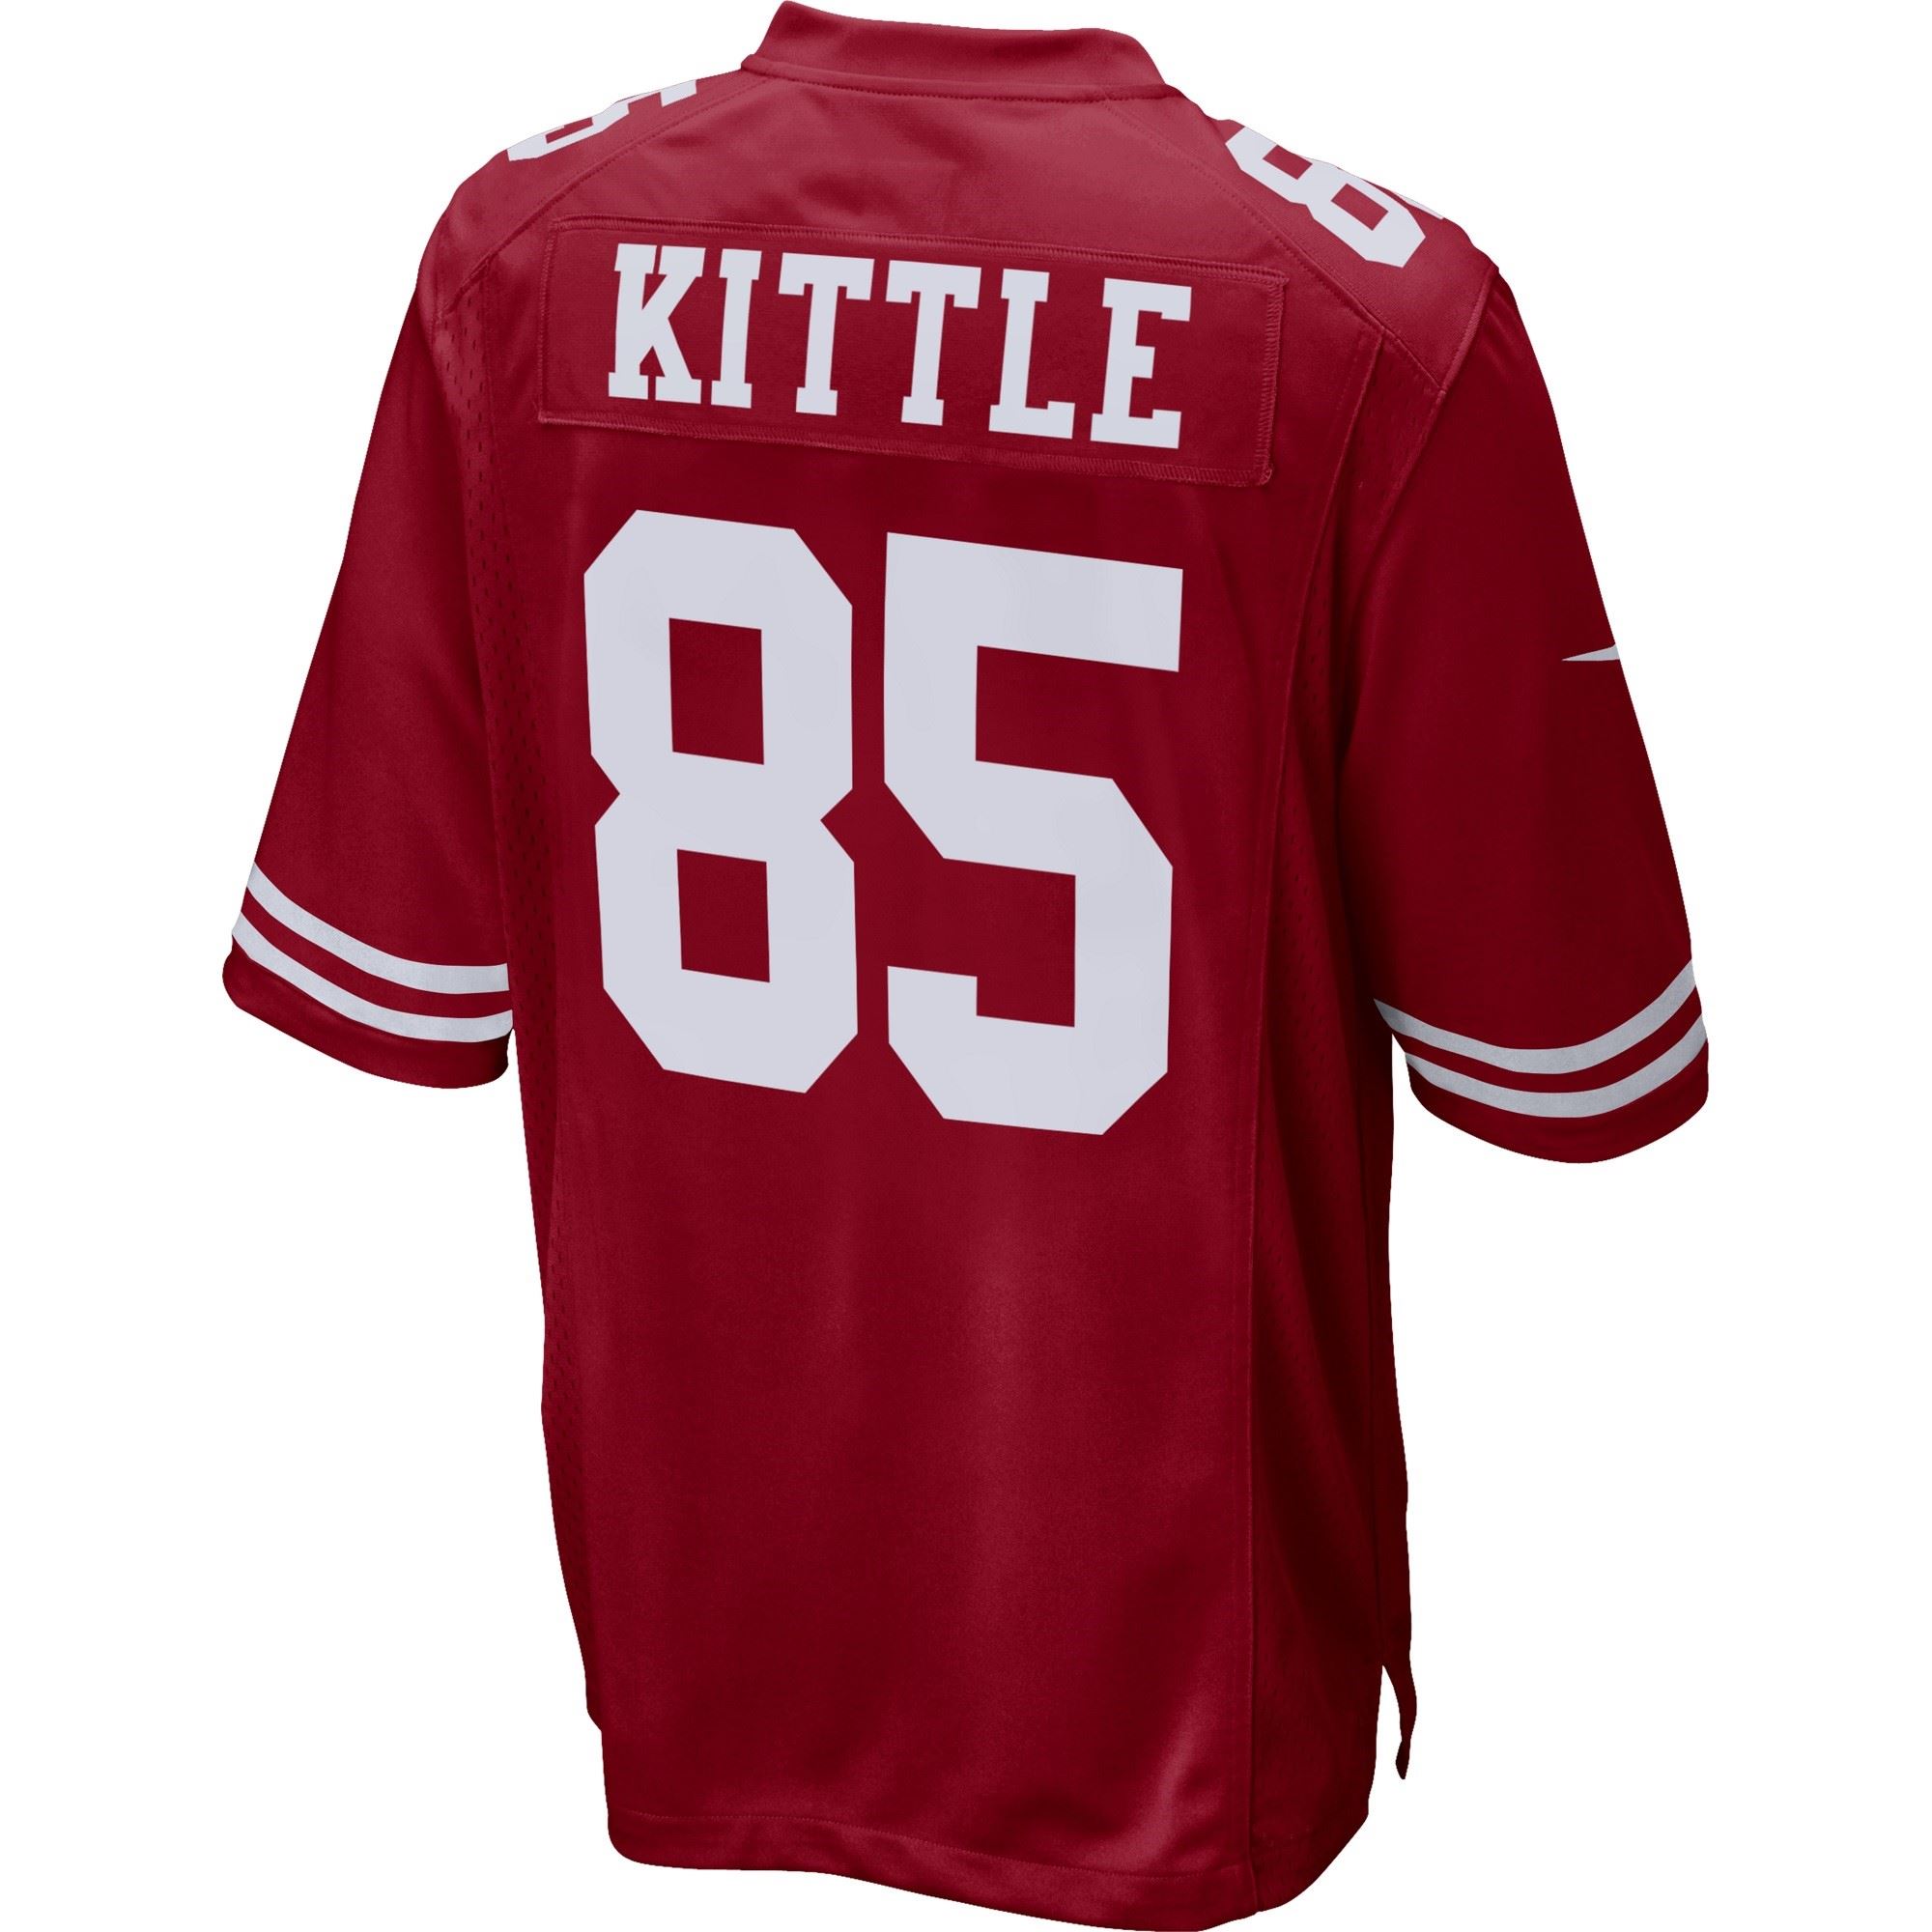 George Kittle #85 San Francisco 49ers NFL Game Team Colour Jersey Nike